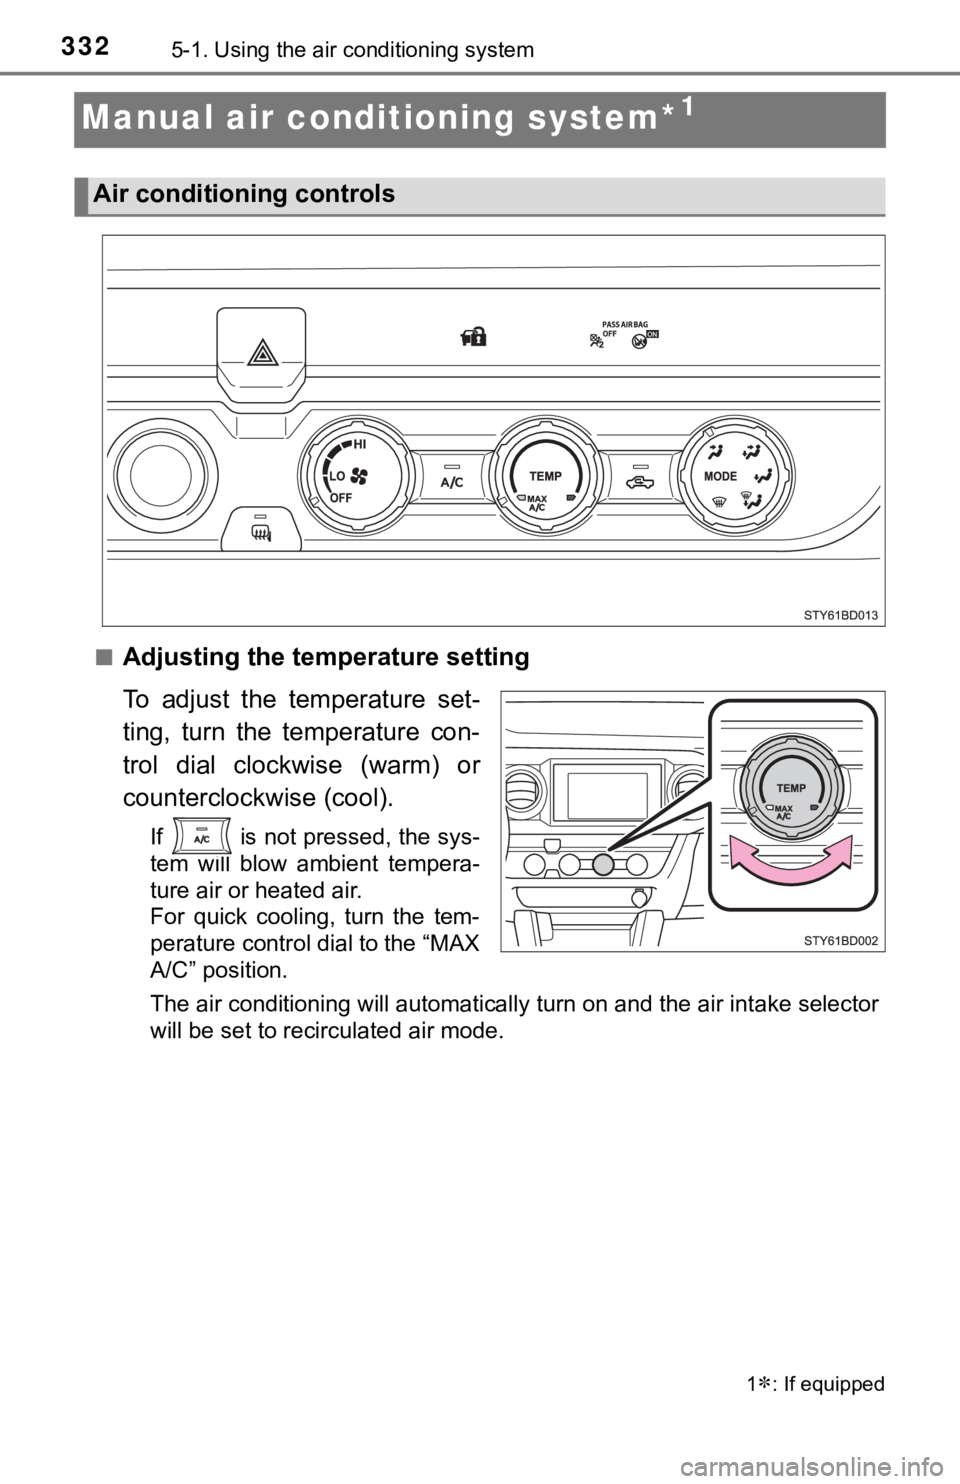 TOYOTA TACOMA 2021  Owners Manual (in English) 3325-1. Using the air conditioning system
Manual air conditioning system*1
■Adjusting the temperature setting
To  adjust  the  temperature  set-
ting,  turn  the  temperature  con-
trol  dial  clock